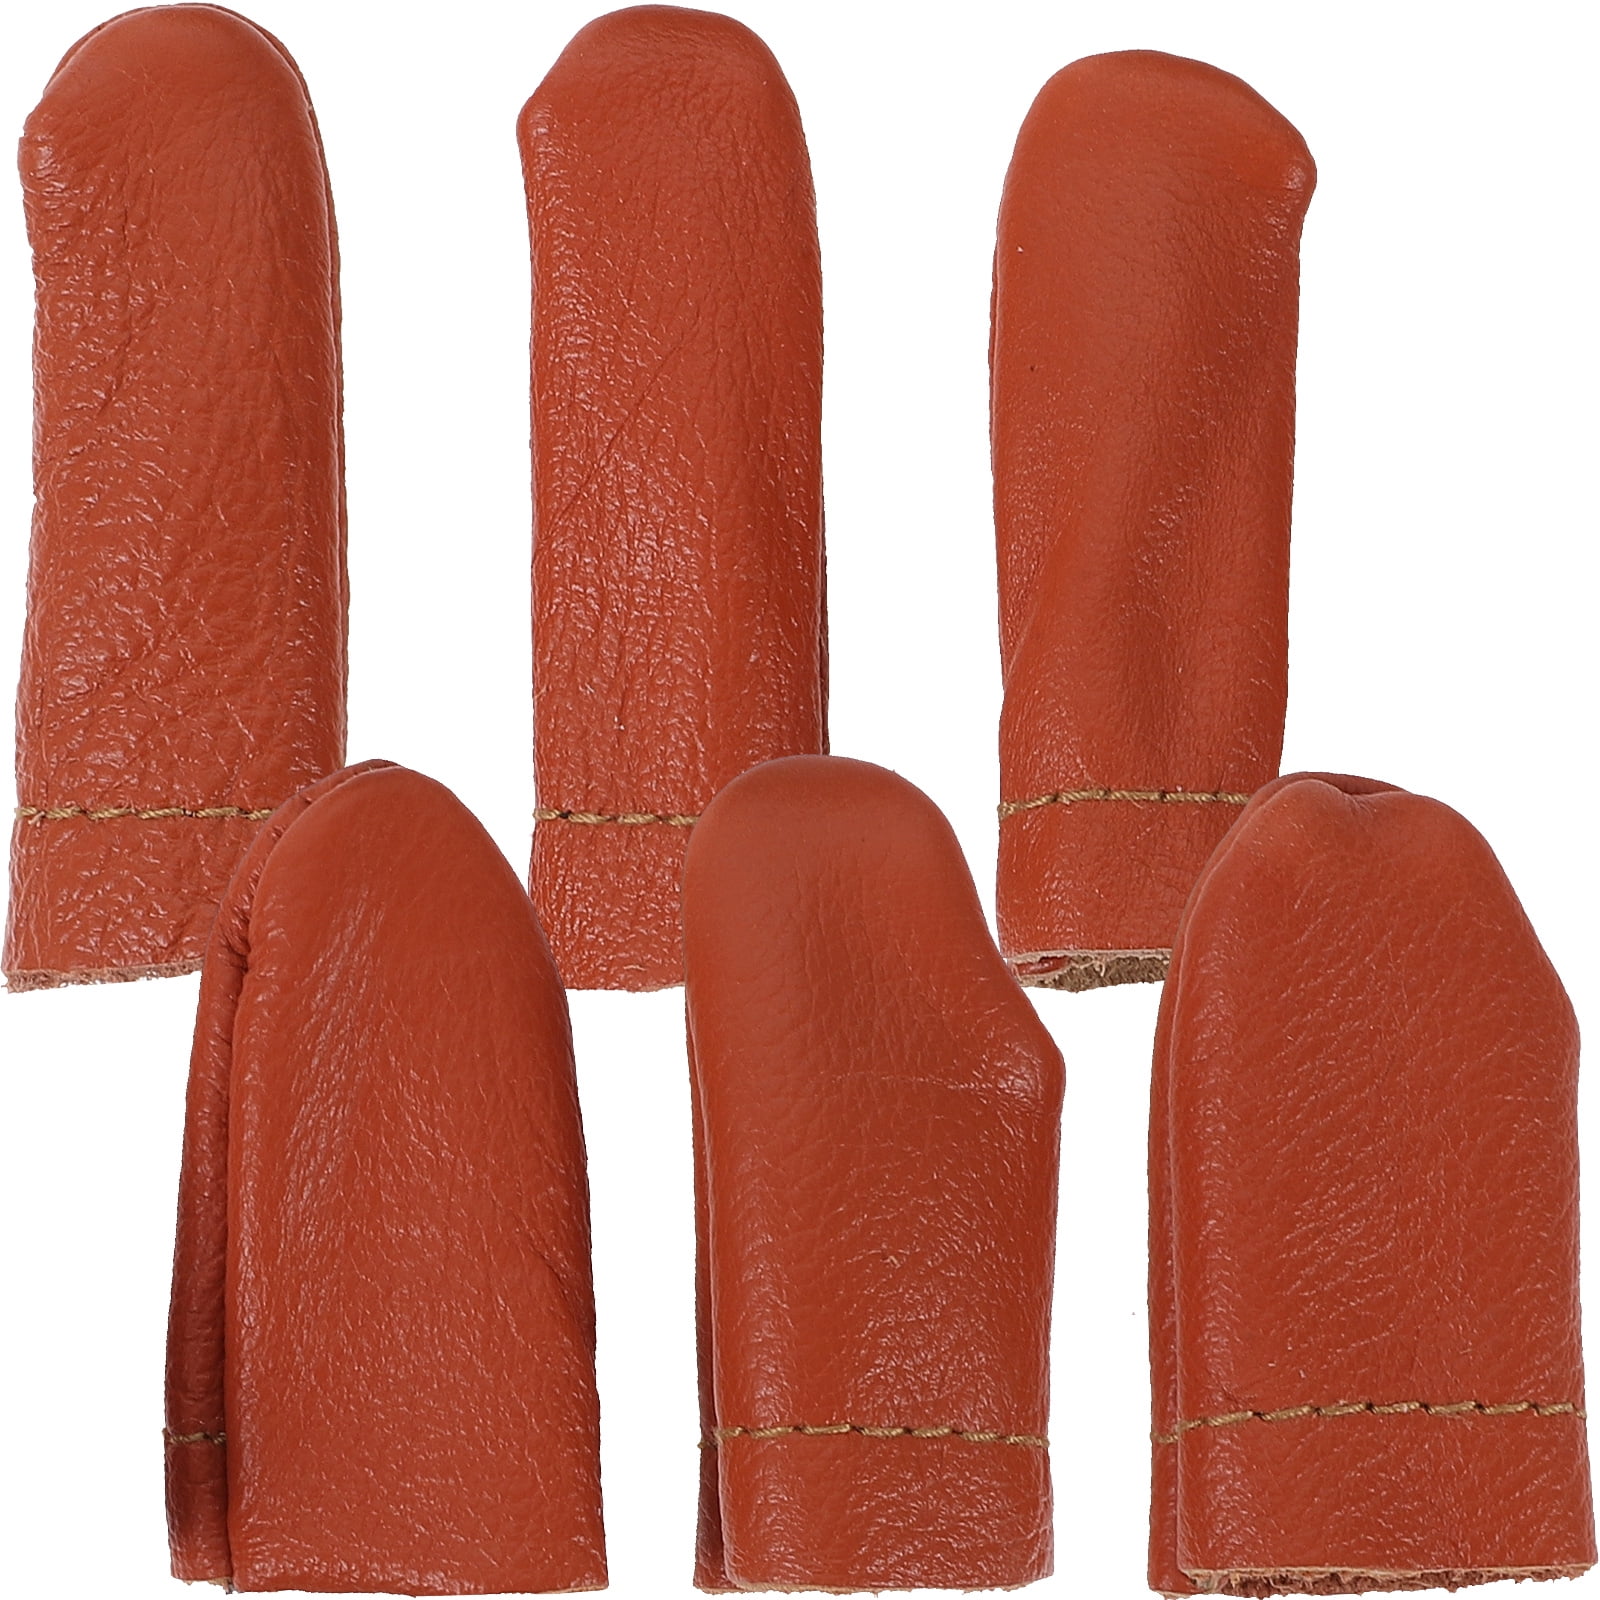 Any suggestions on finger protectors from needle tension? My fingers get  chewed up and my wrist gets very strained when working— usually on thicker  fabrics. Maybe using wrong sized needle? Any suggestions